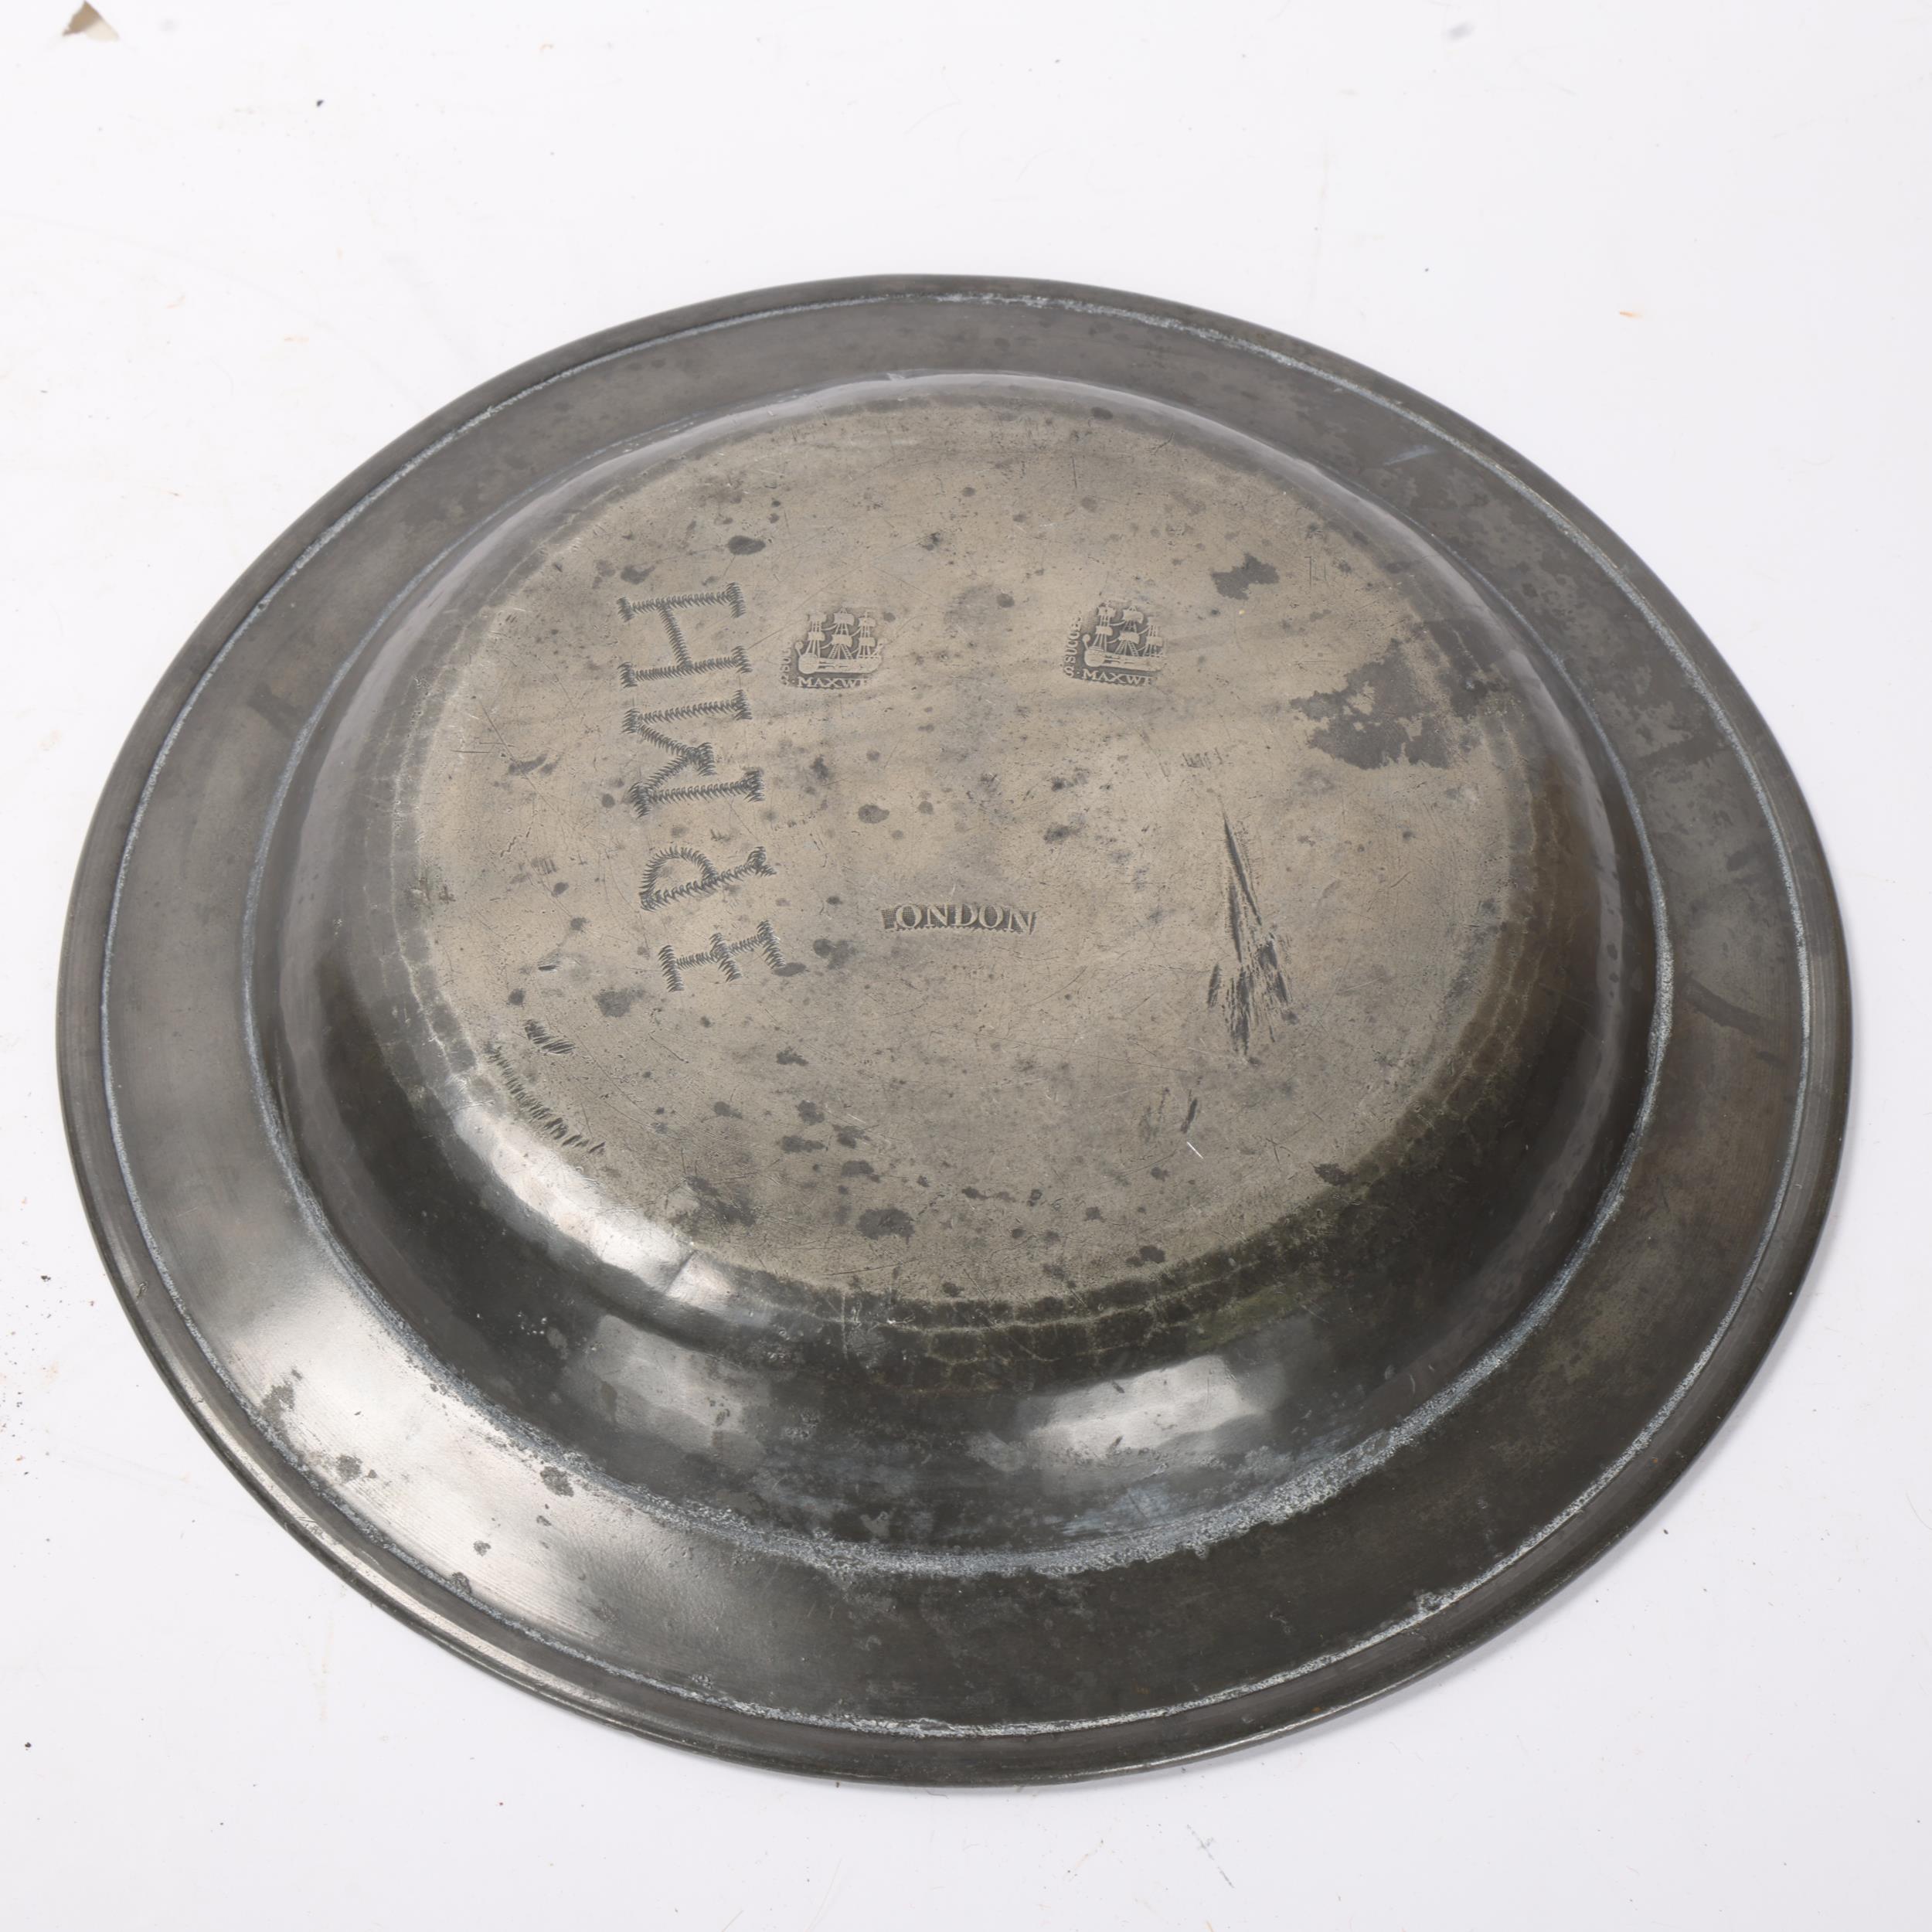 AMERICAN INTEREST - pewter charger circa 1800, made by Stephen Maxwell (Scottish Nationalist), - Image 2 of 3